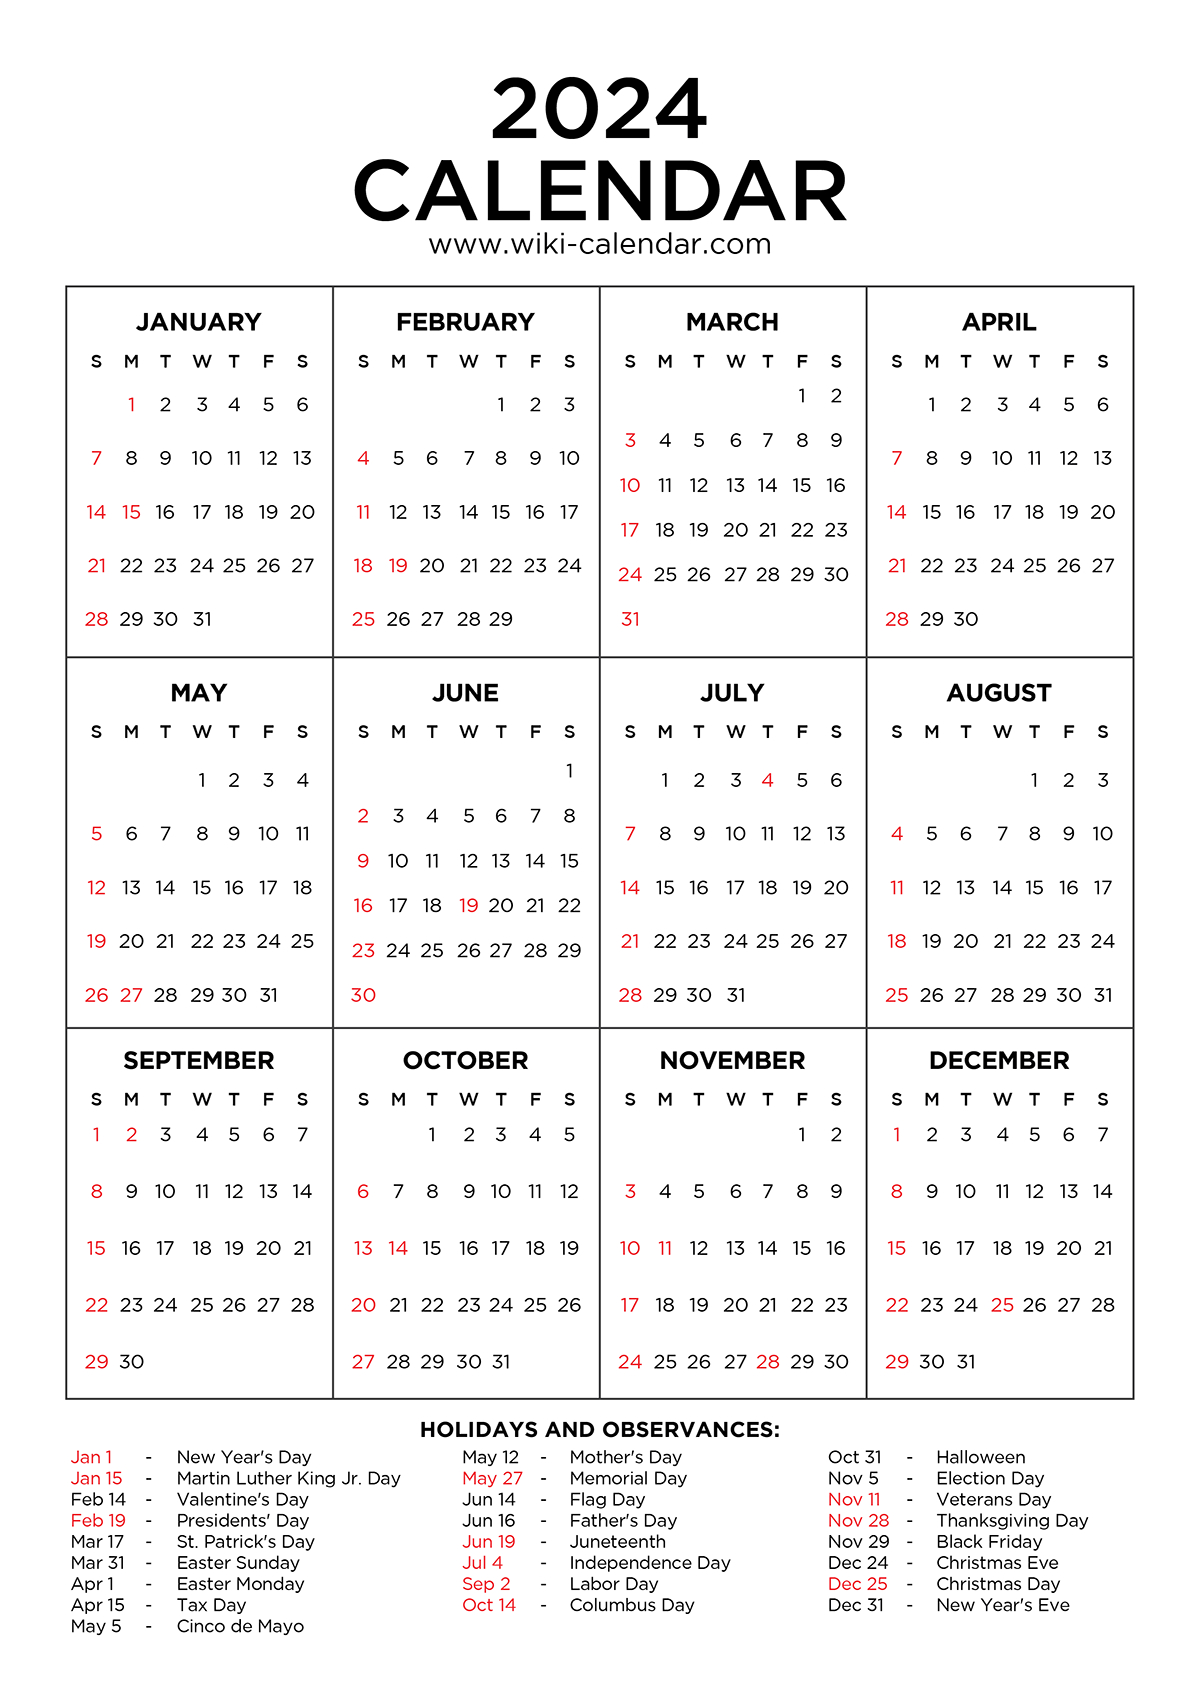 Year 2024 Calendar Printable With Holidays - Wiki Calendar | 2024 Yearly Calendar Download